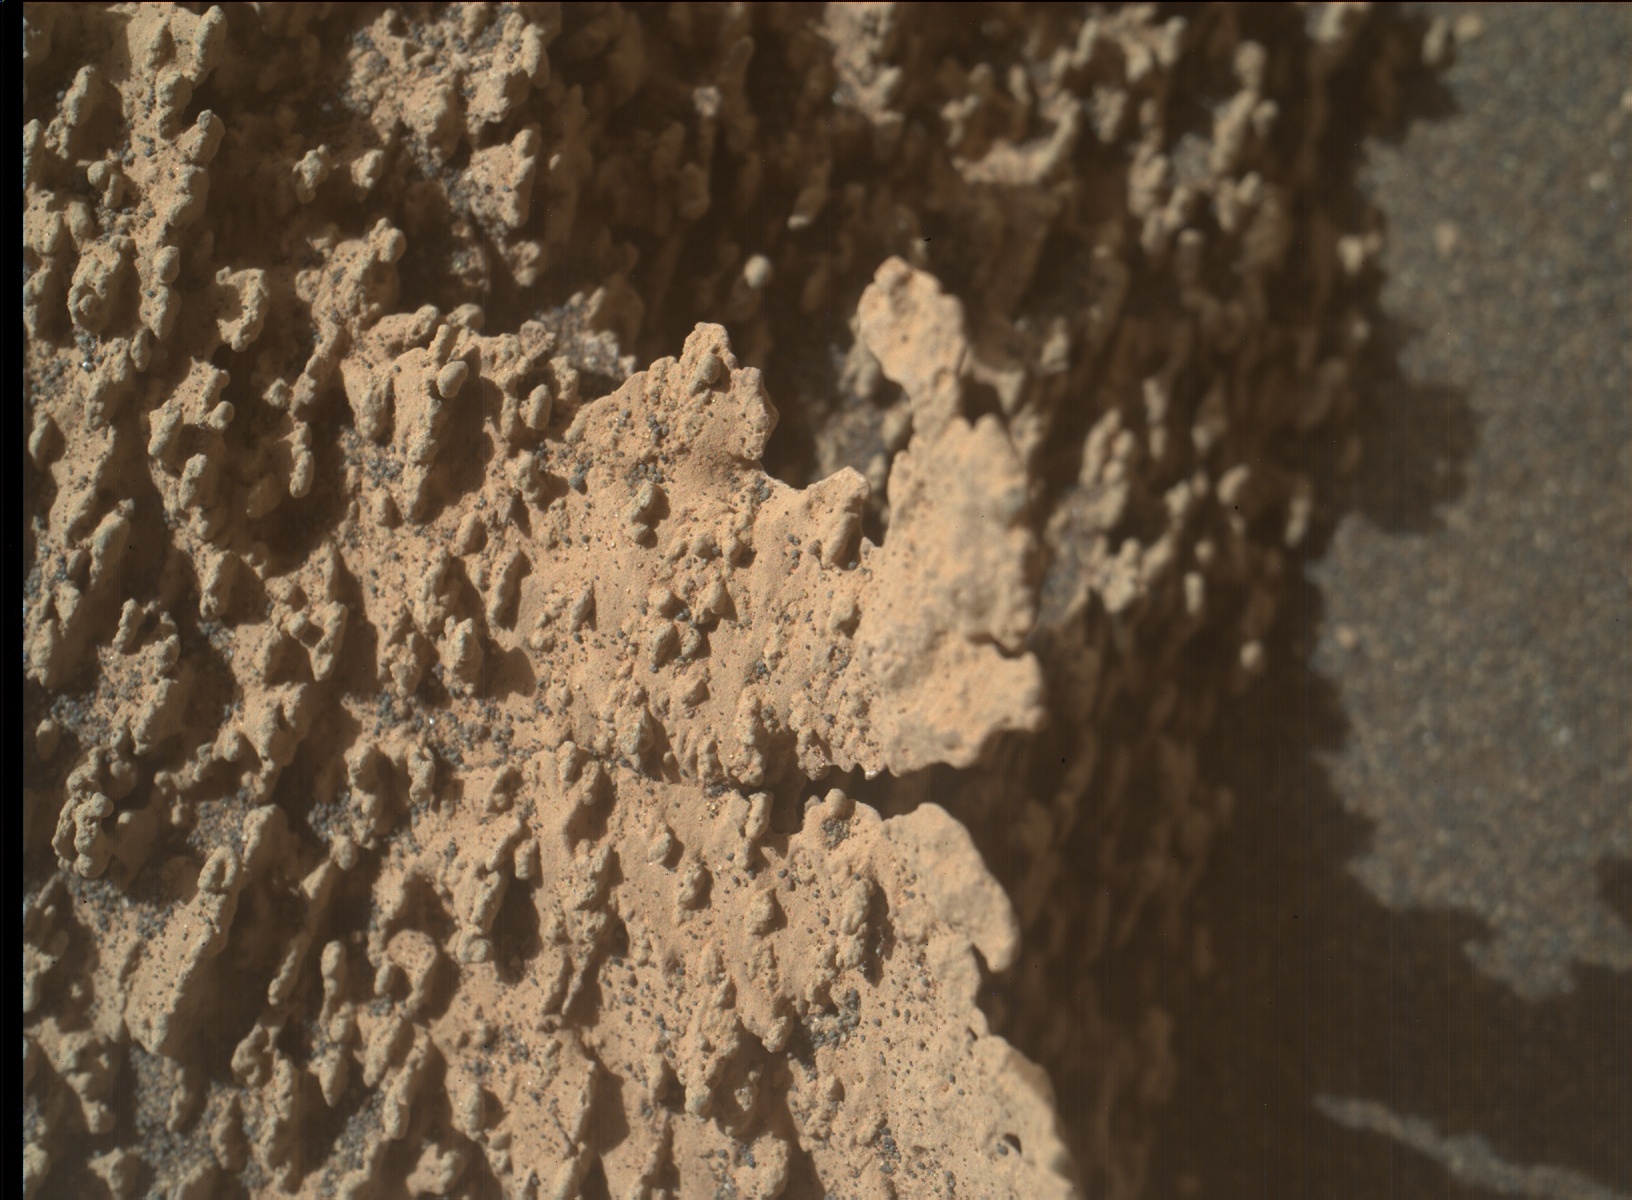 Nasa's Mars rover Curiosity acquired this image using its Mars Hand Lens Imager (MAHLI) on Sol 3594